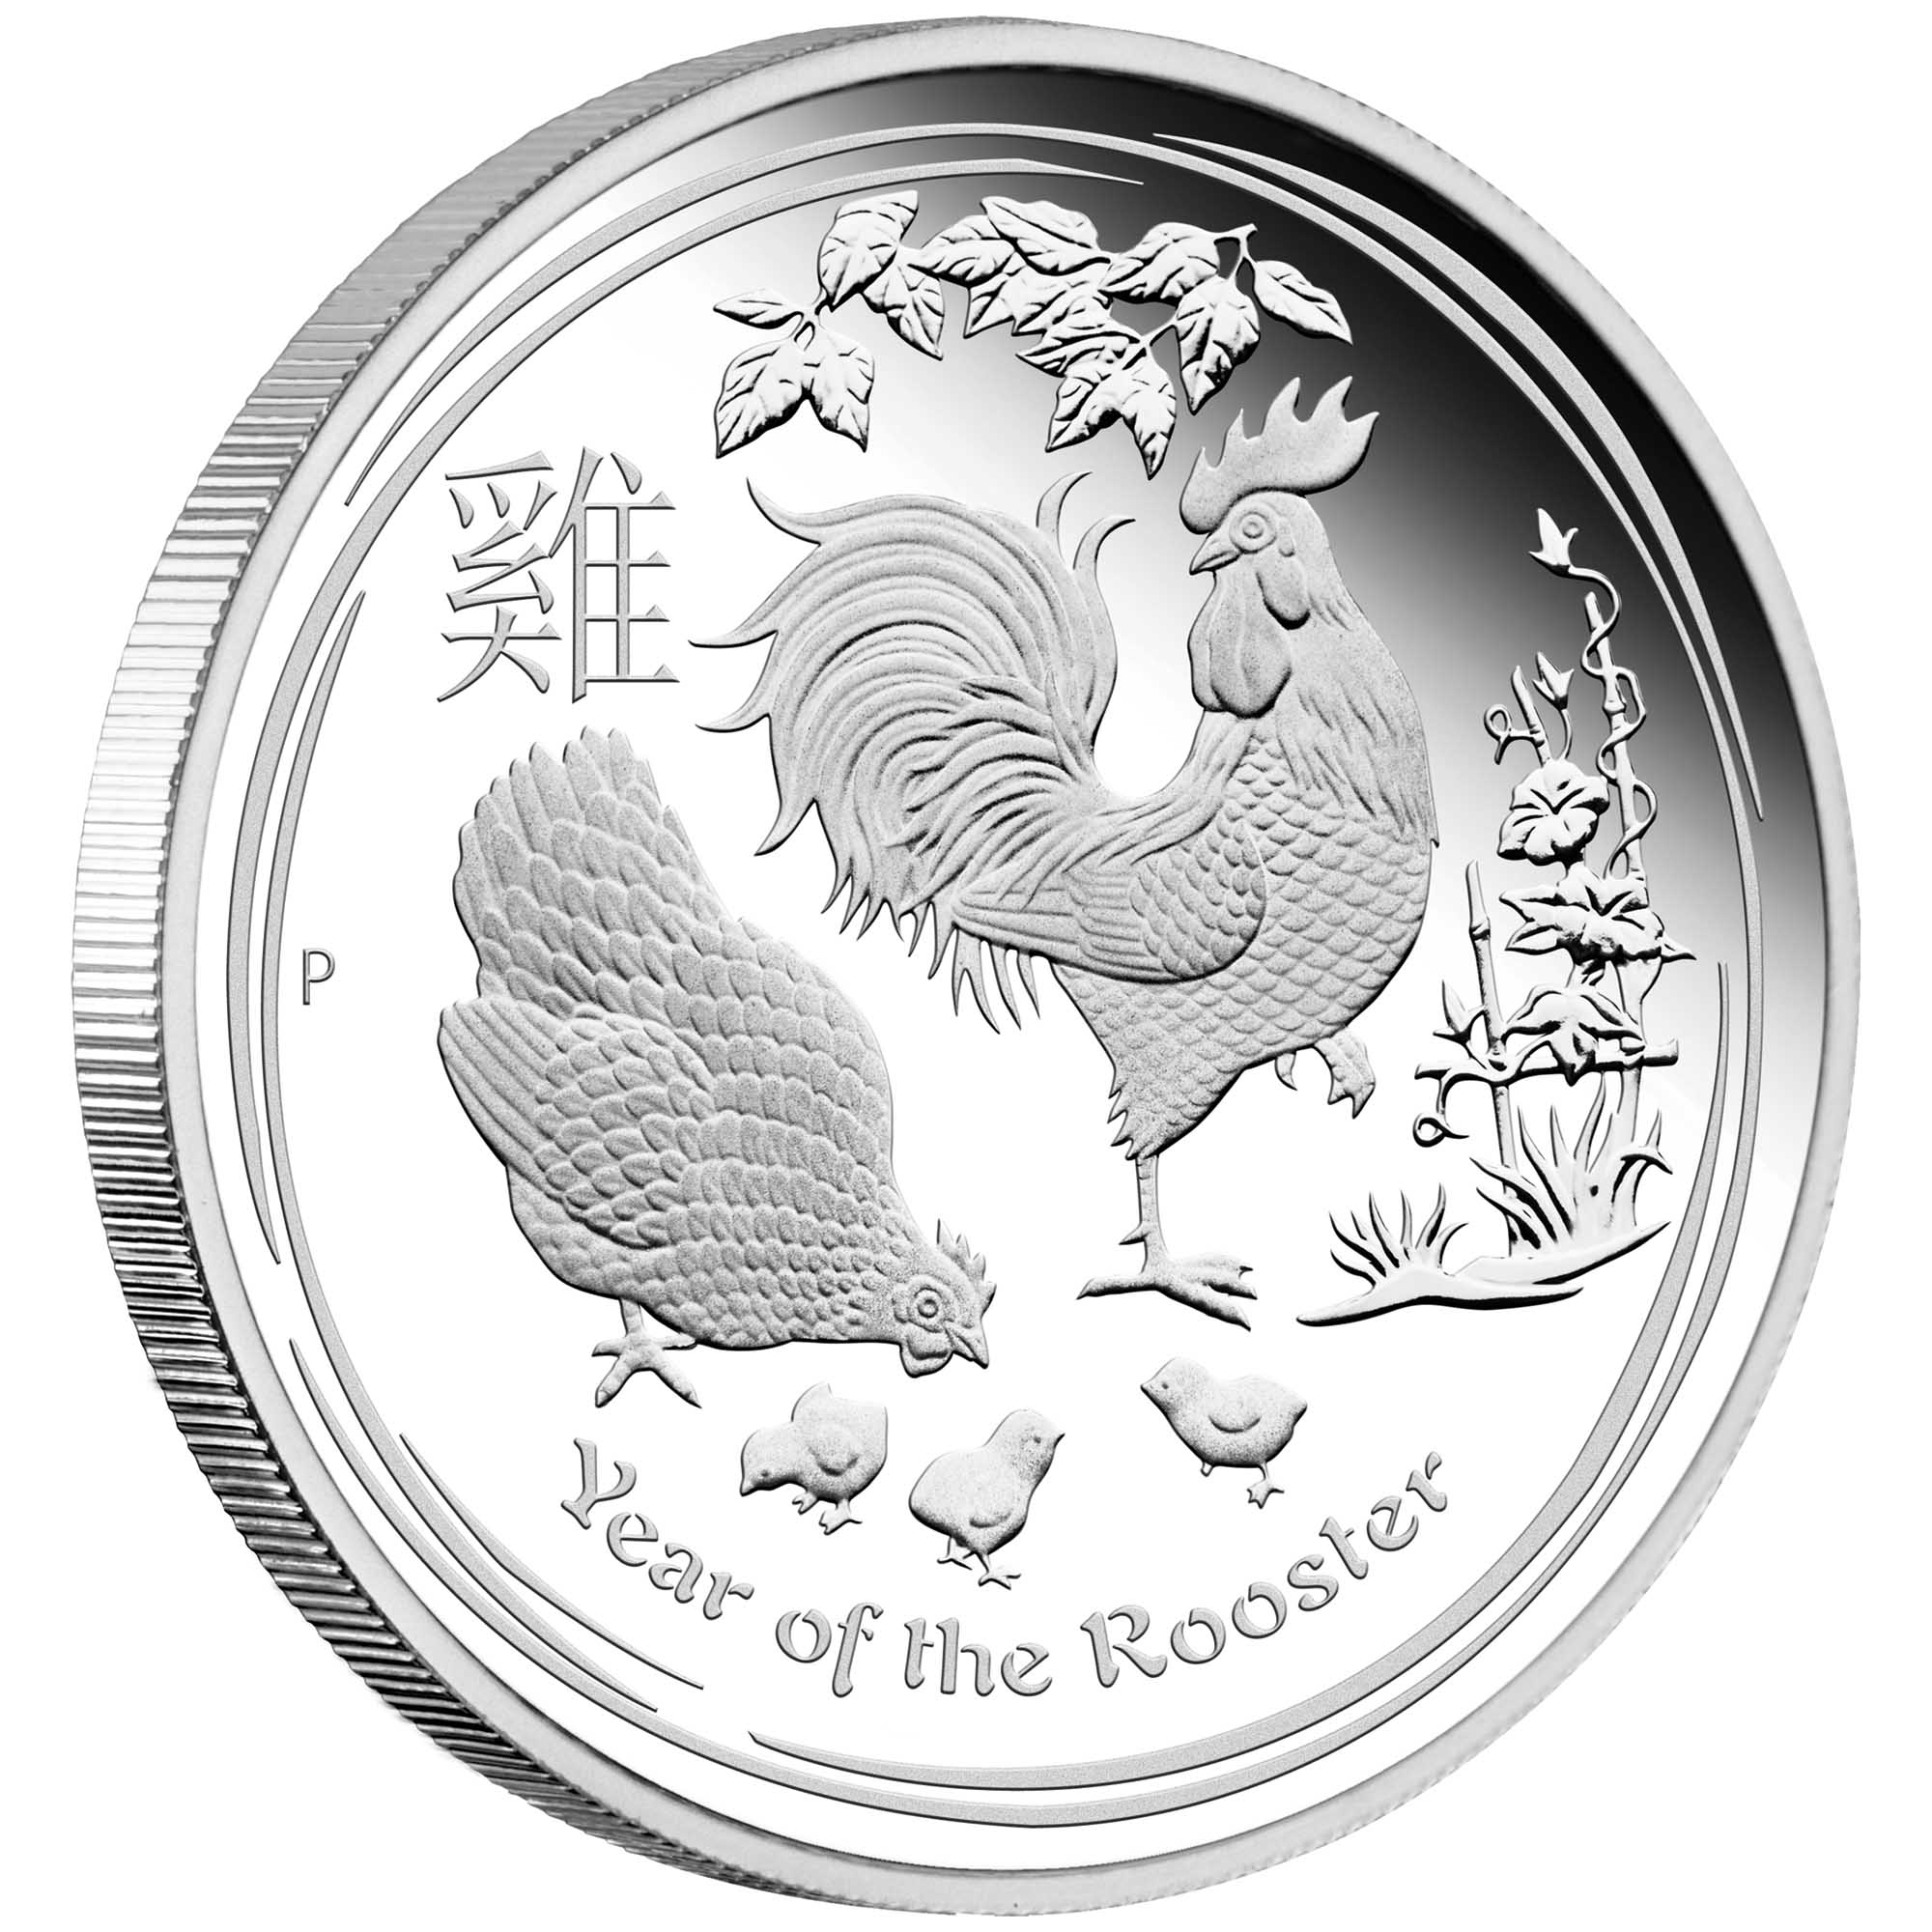 2017 Year of the Rooster 1oz Silver Australia Lunar Series II Perth Mint Coin BU 